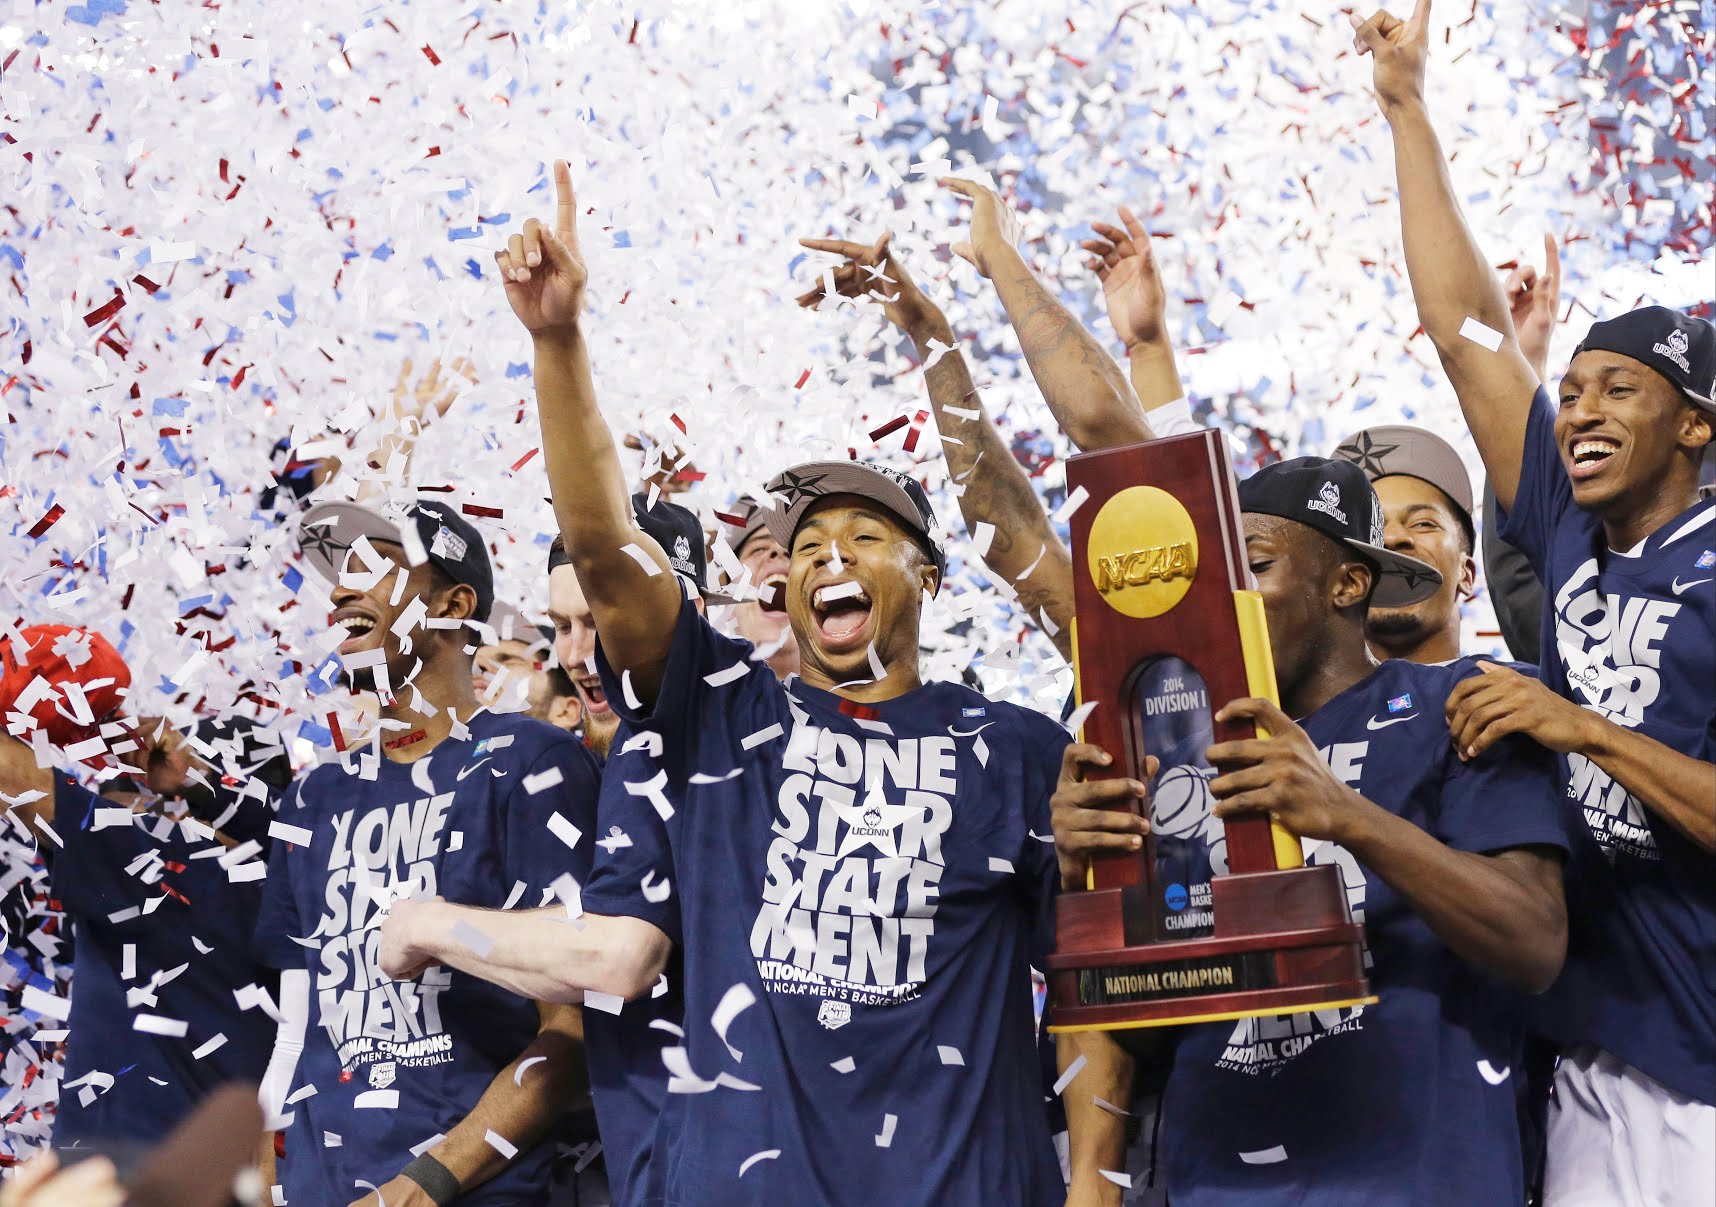 uconn-ncaa-champions-march-madness-college-basketball1.jpg